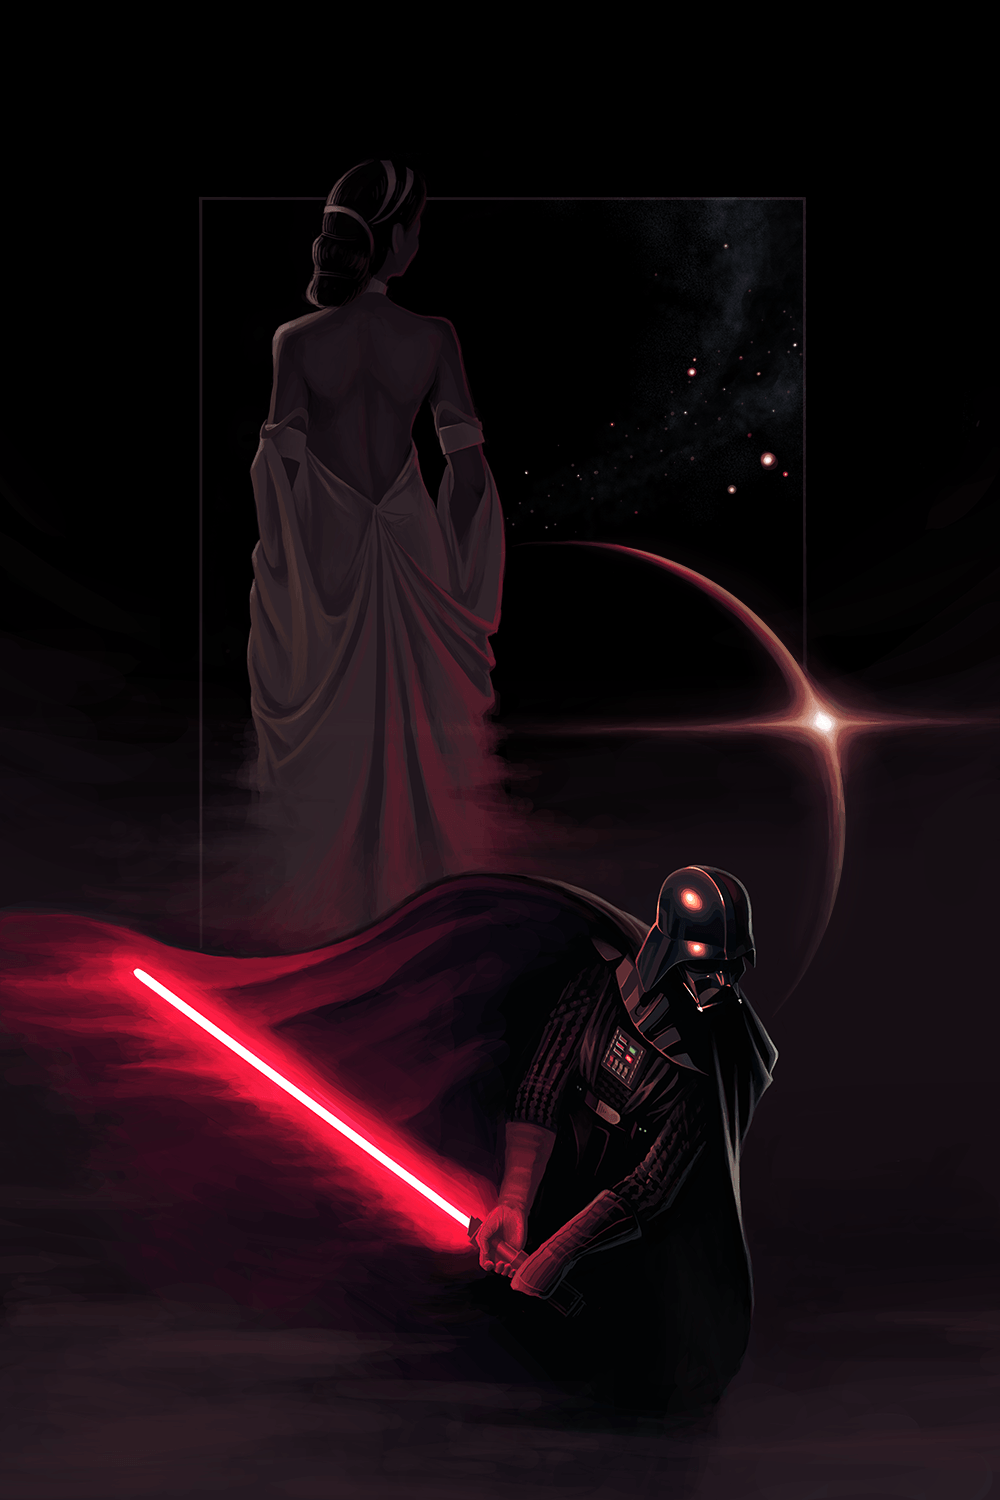 Darth Vader And Jedi Queen Wallpapers Wallpaper Cave Images, Photos, Reviews